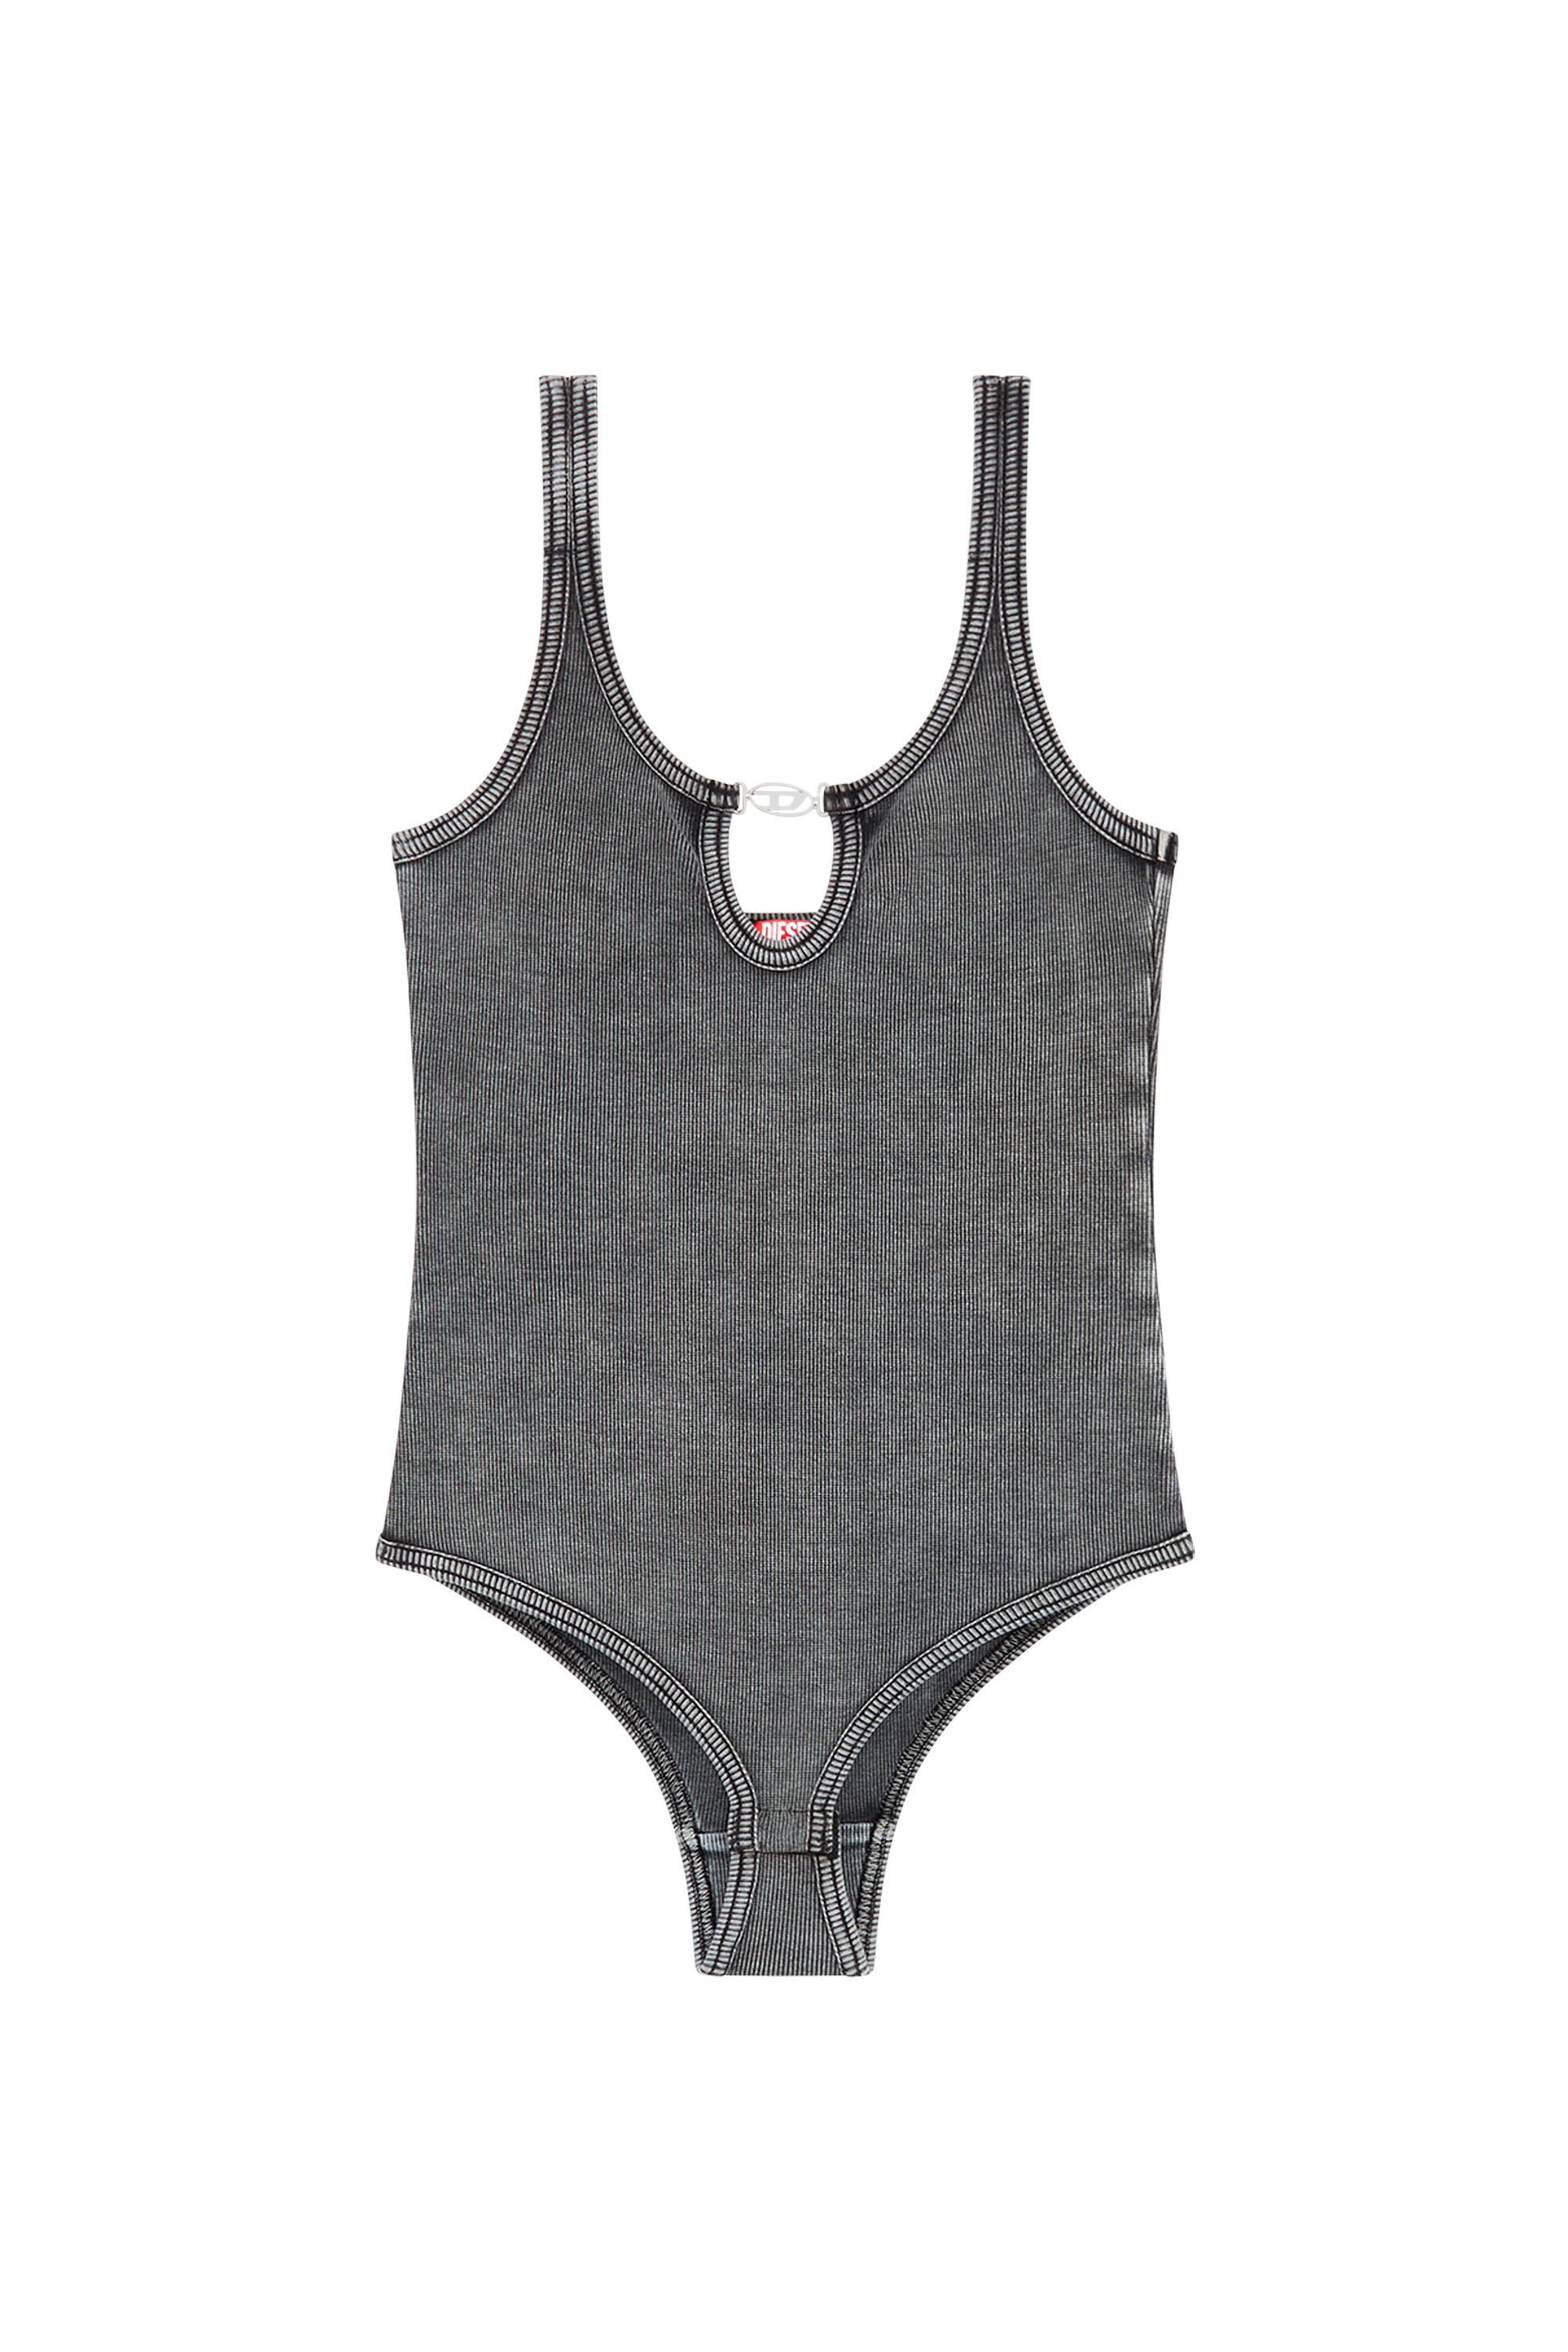 Diesel - UFBY-D-OVAL-COTTON-RIB-BODYSUIT, Mujer Body en canalé con placa Oval D in Gris - Image 4